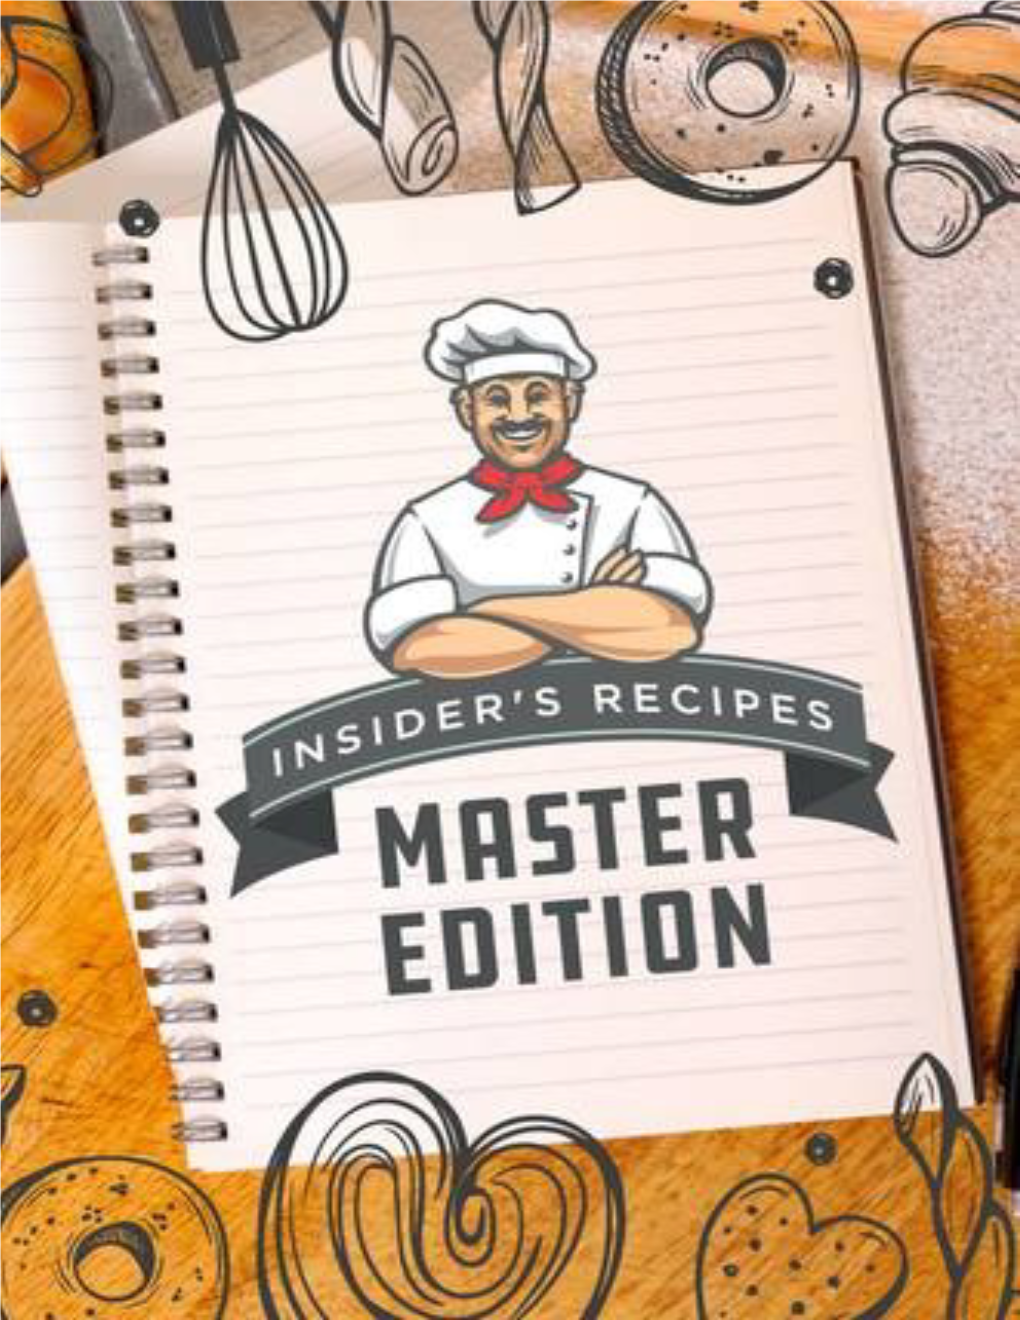 Insider's Recipes Master Edition Contents